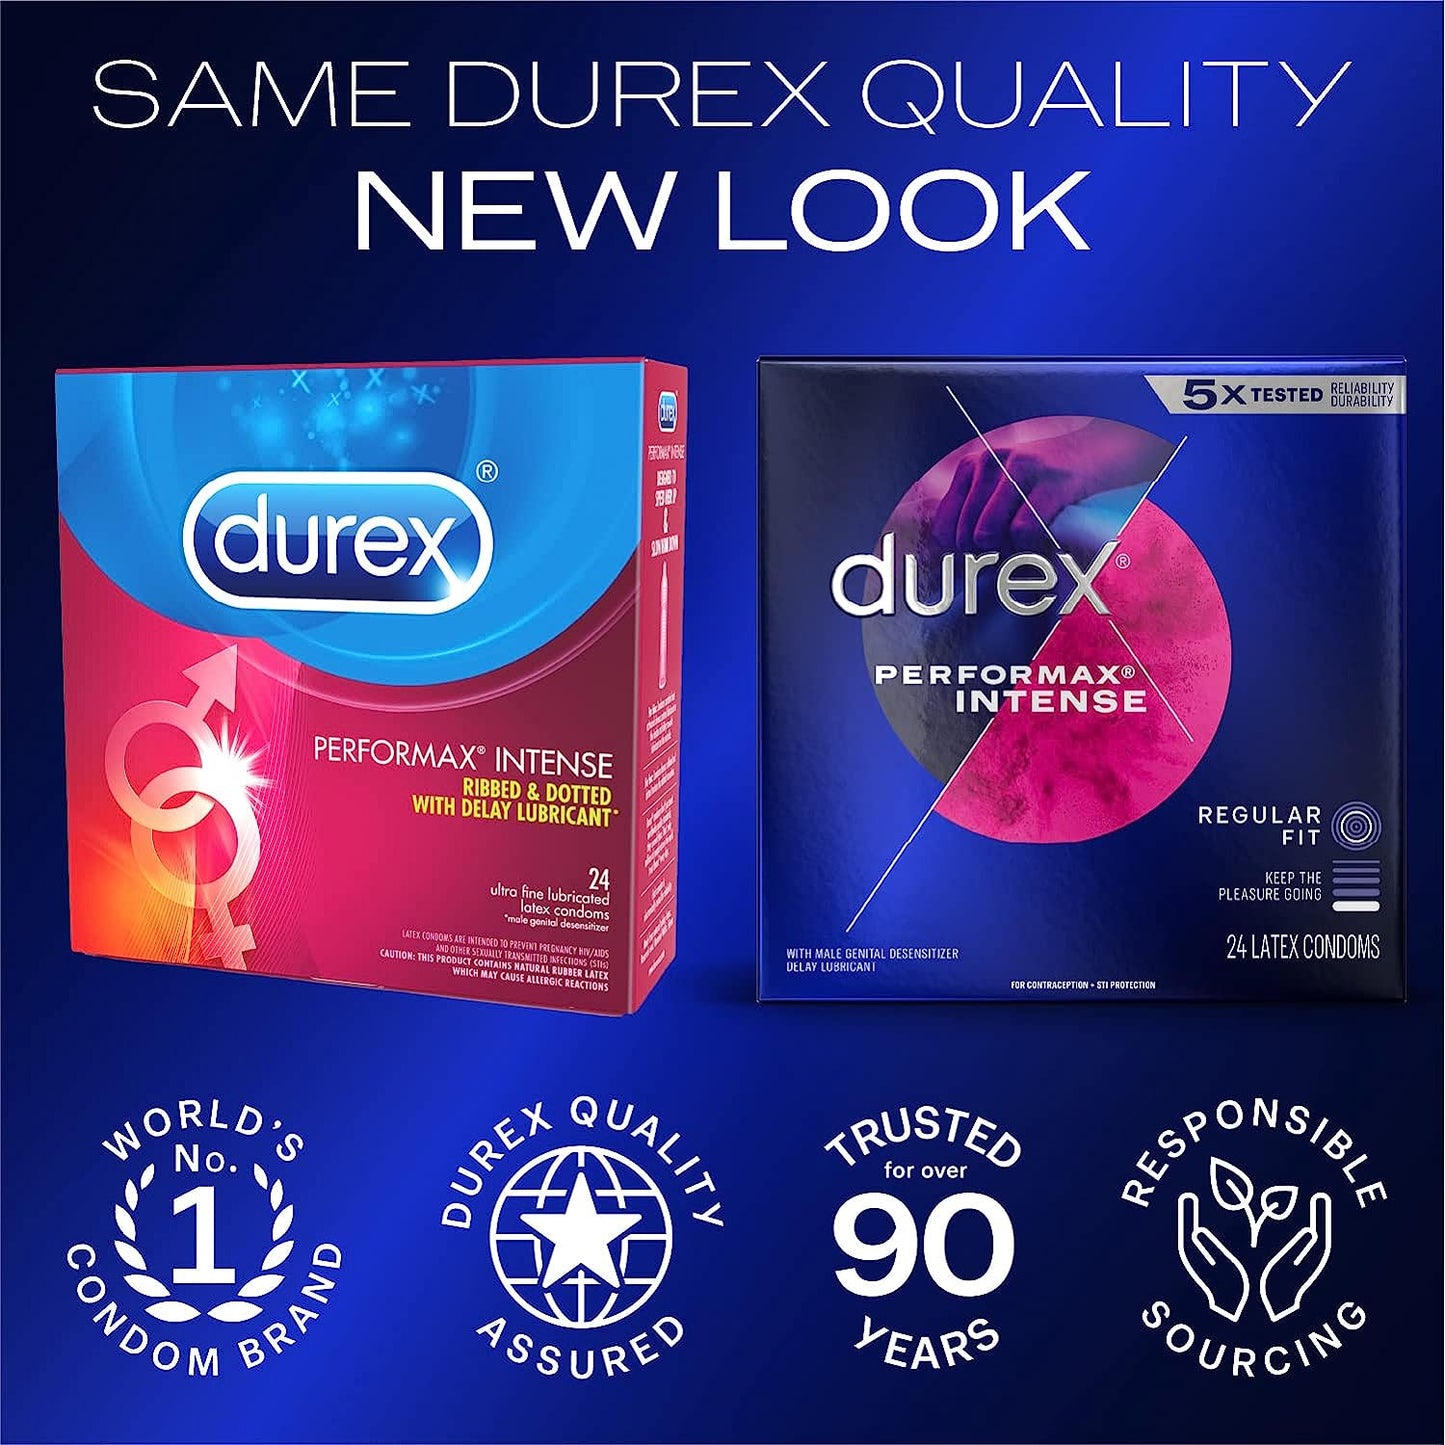 Durex - Performax Intense Natural Rubber Latex Condoms, Regular Fit, 24 Count, Contains Desensitizing Lube for Men, FSA & HSA Eligible (Packaging May Vary)